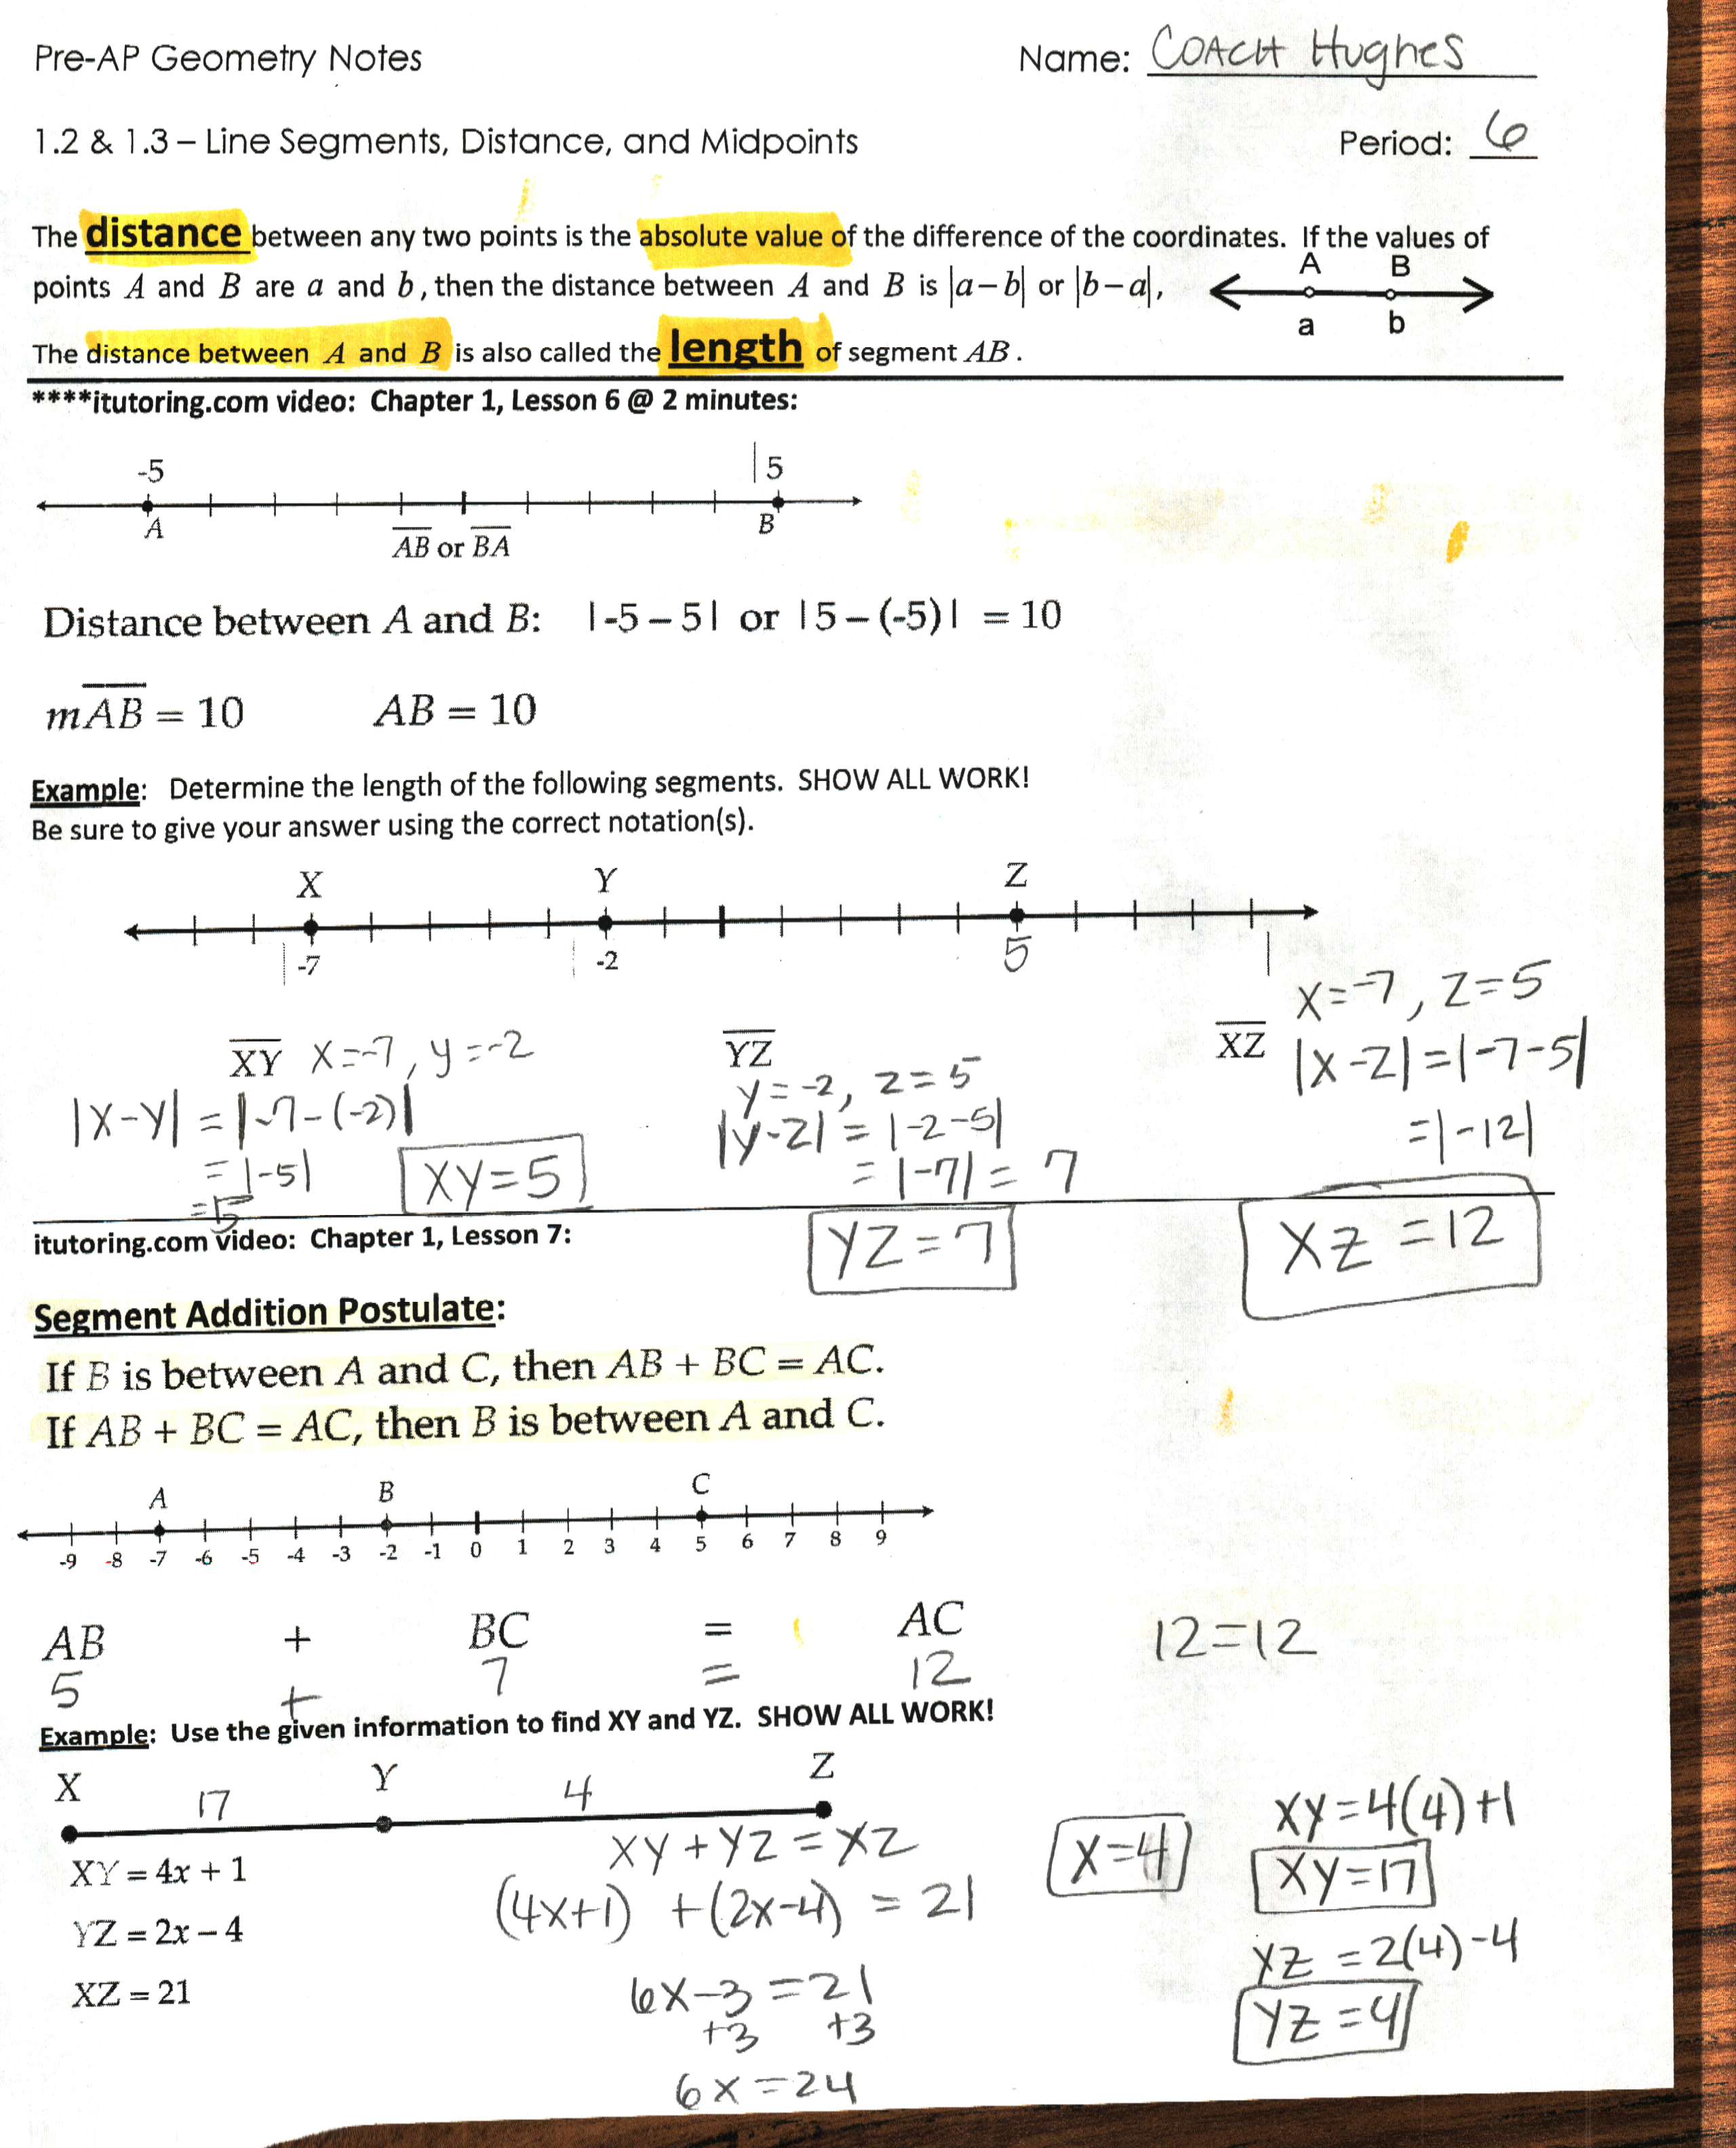 30 Midpoint And Distance Formula Worksheet - Worksheet Project List